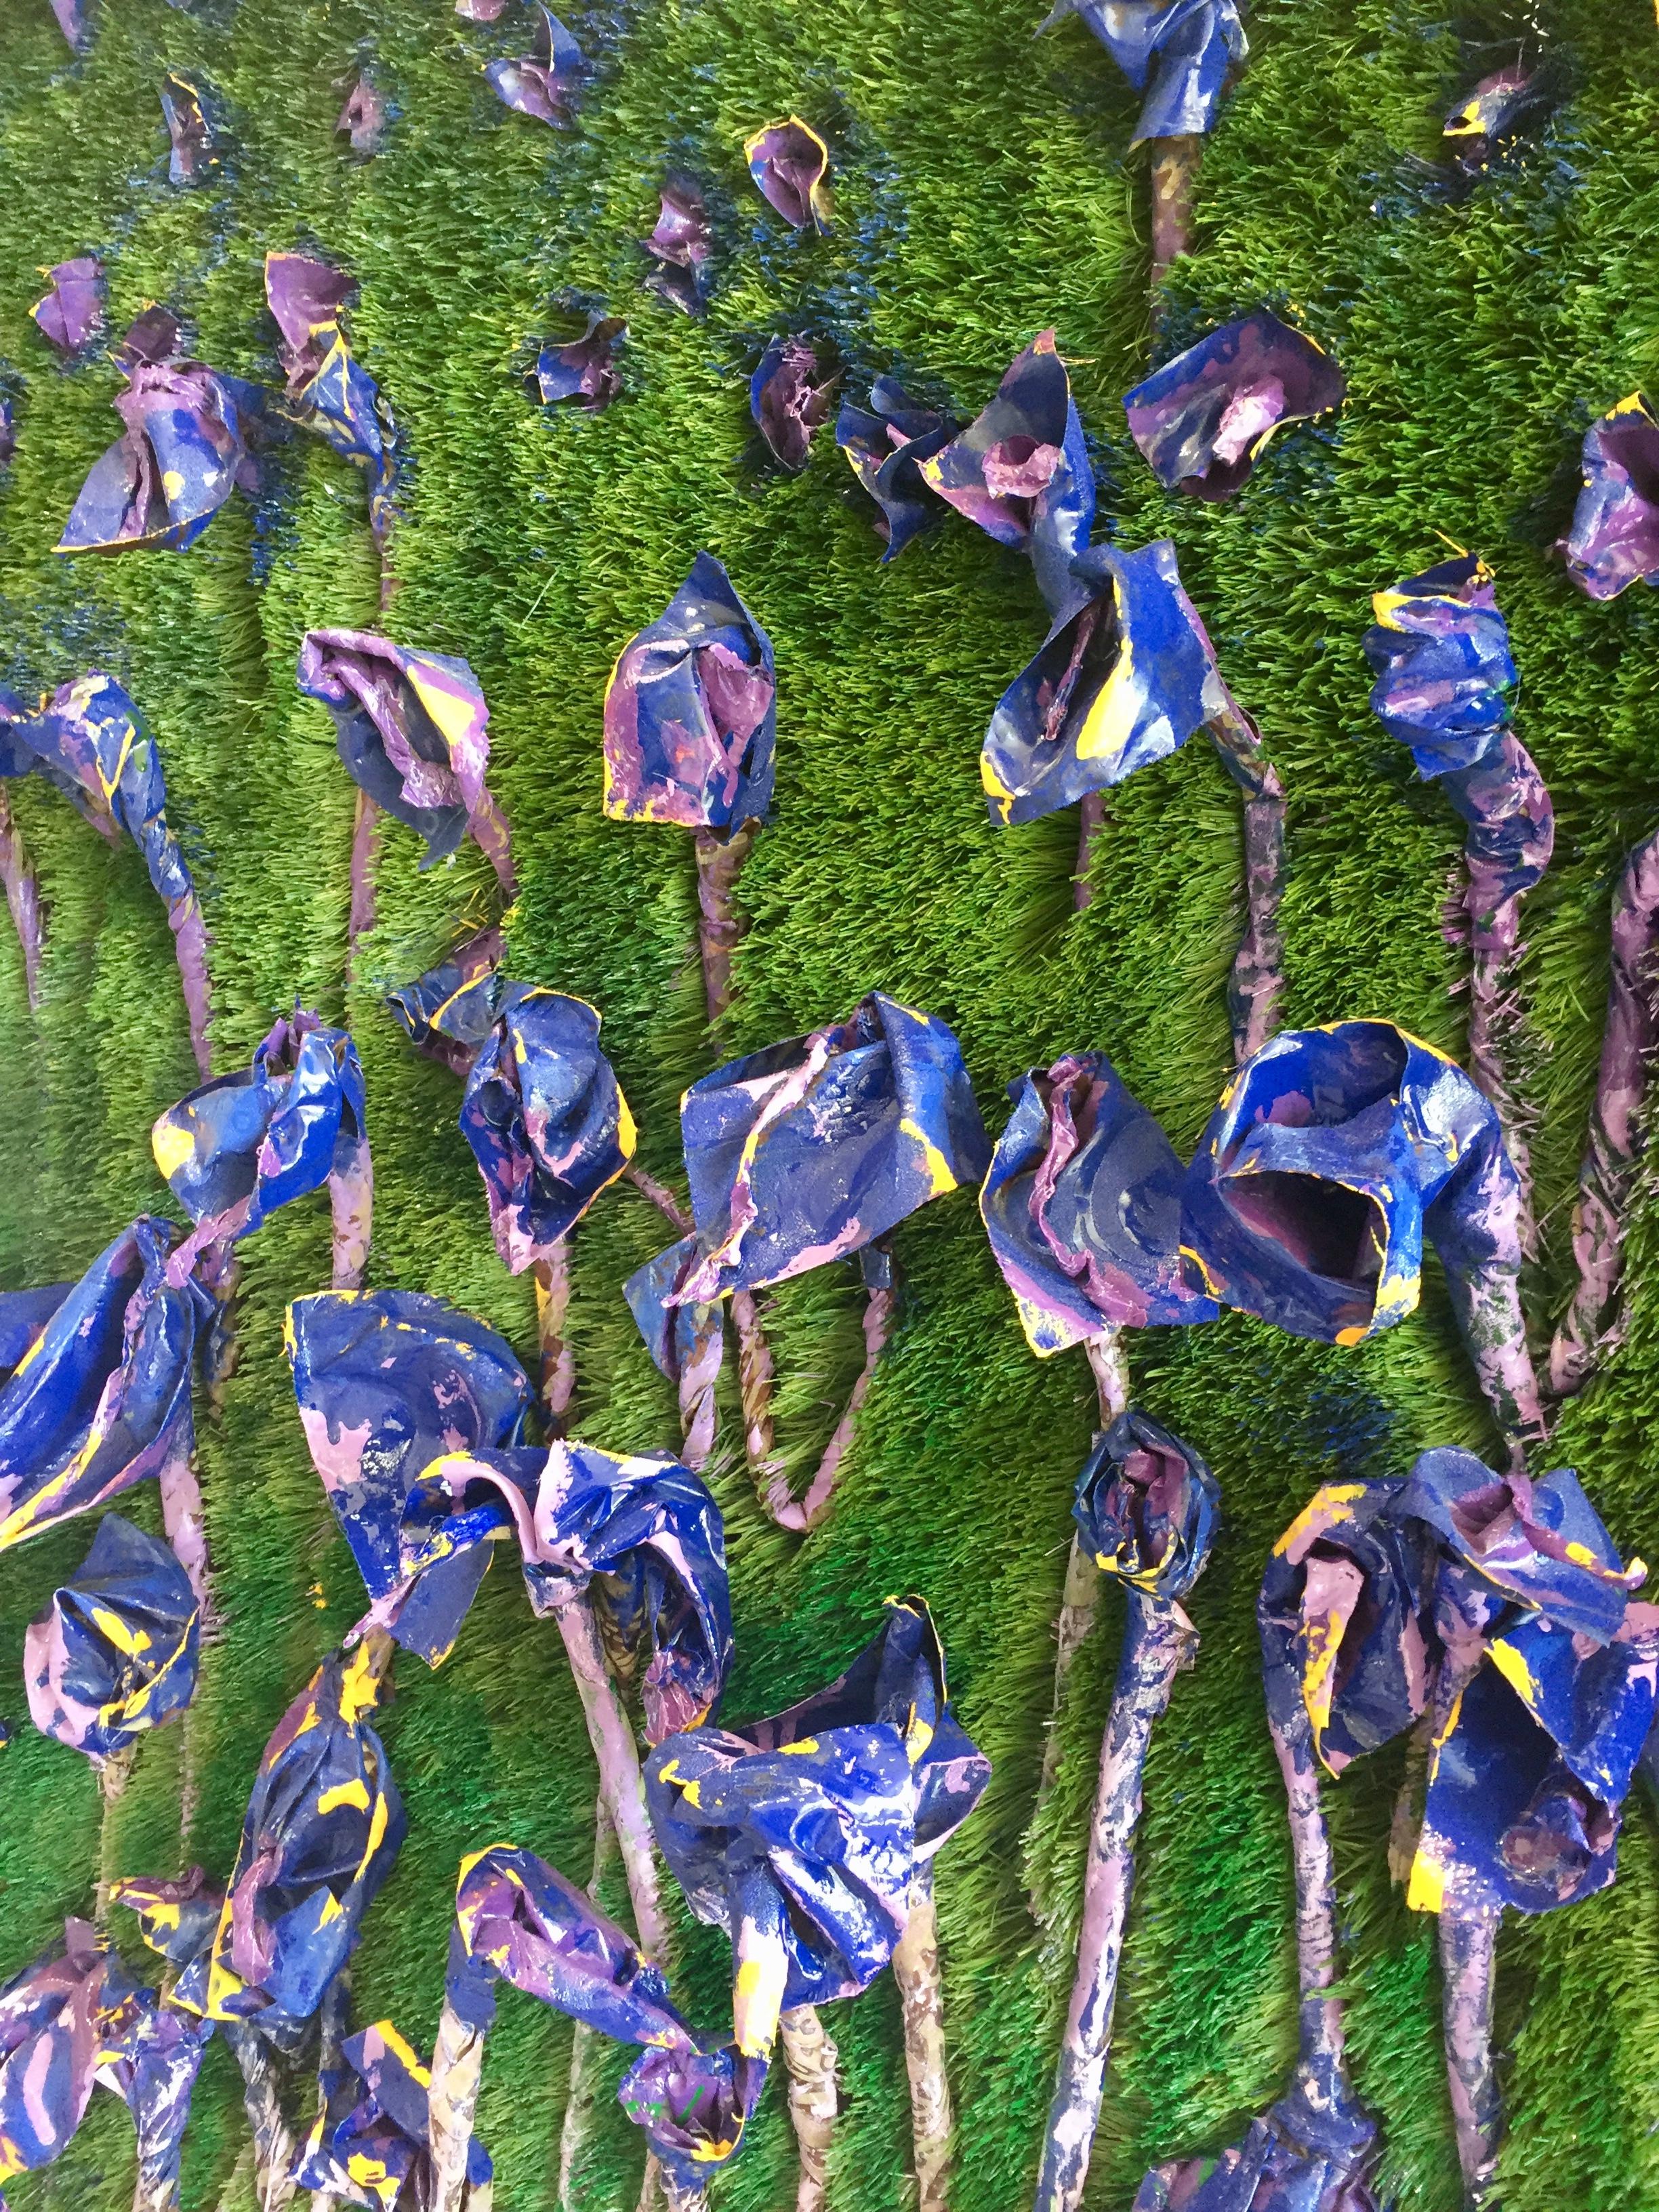 Large 3-D Purple Irises within a Green Field Background, Female Figure Reading Book
Mixed Media 
H 58.66